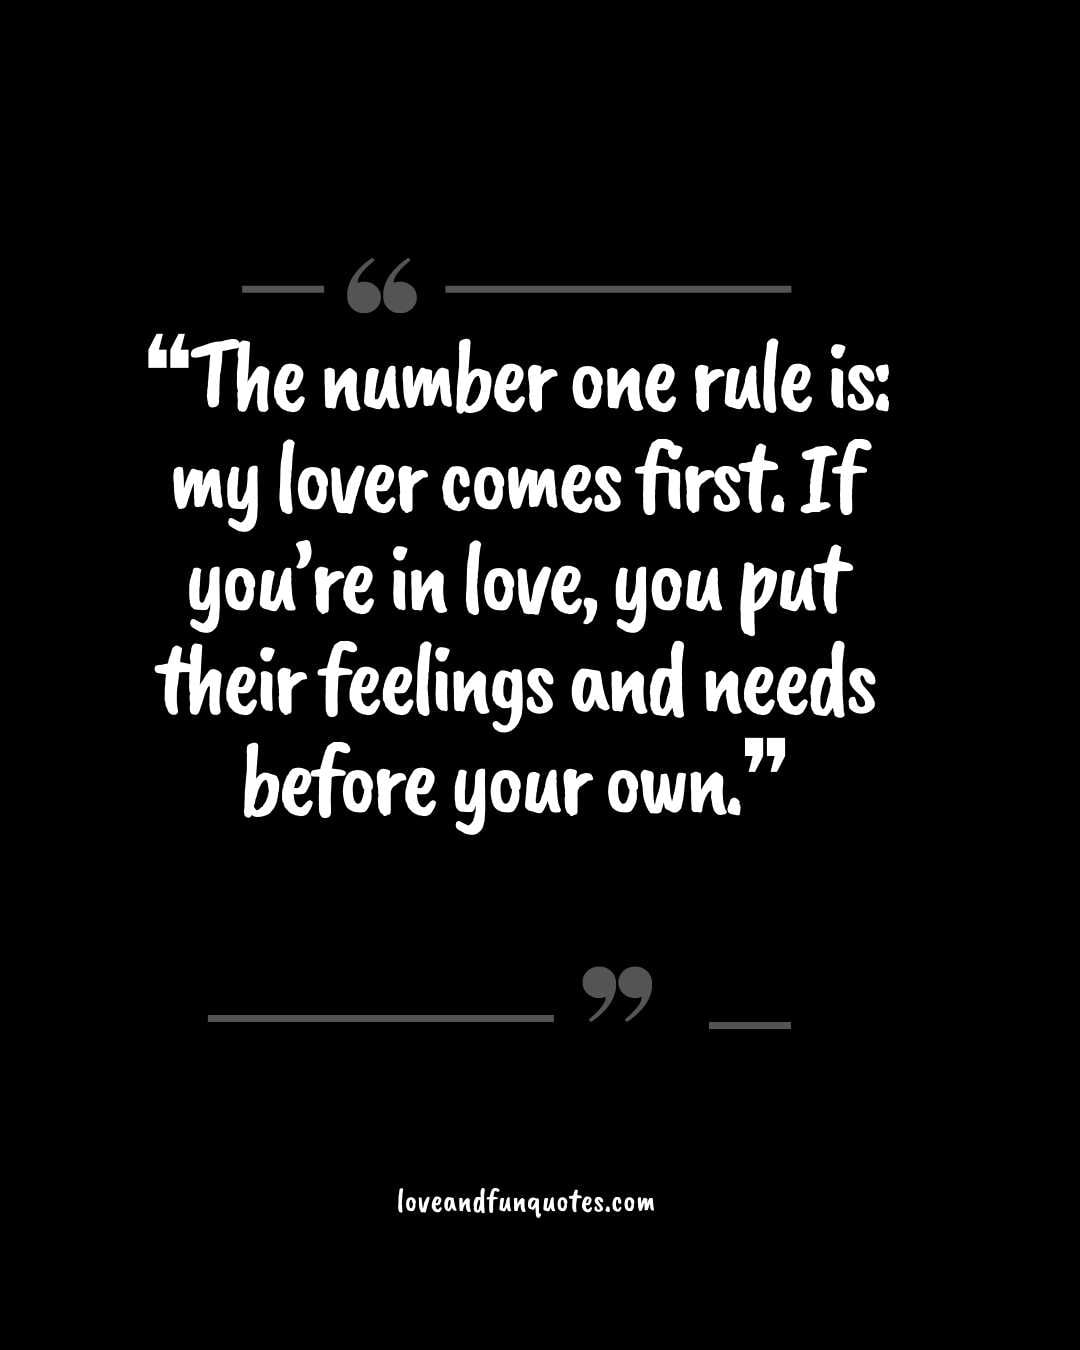 ❝The number one rule is my lover comes first. If you’re in love, you put their feelings and needs before your own.❞